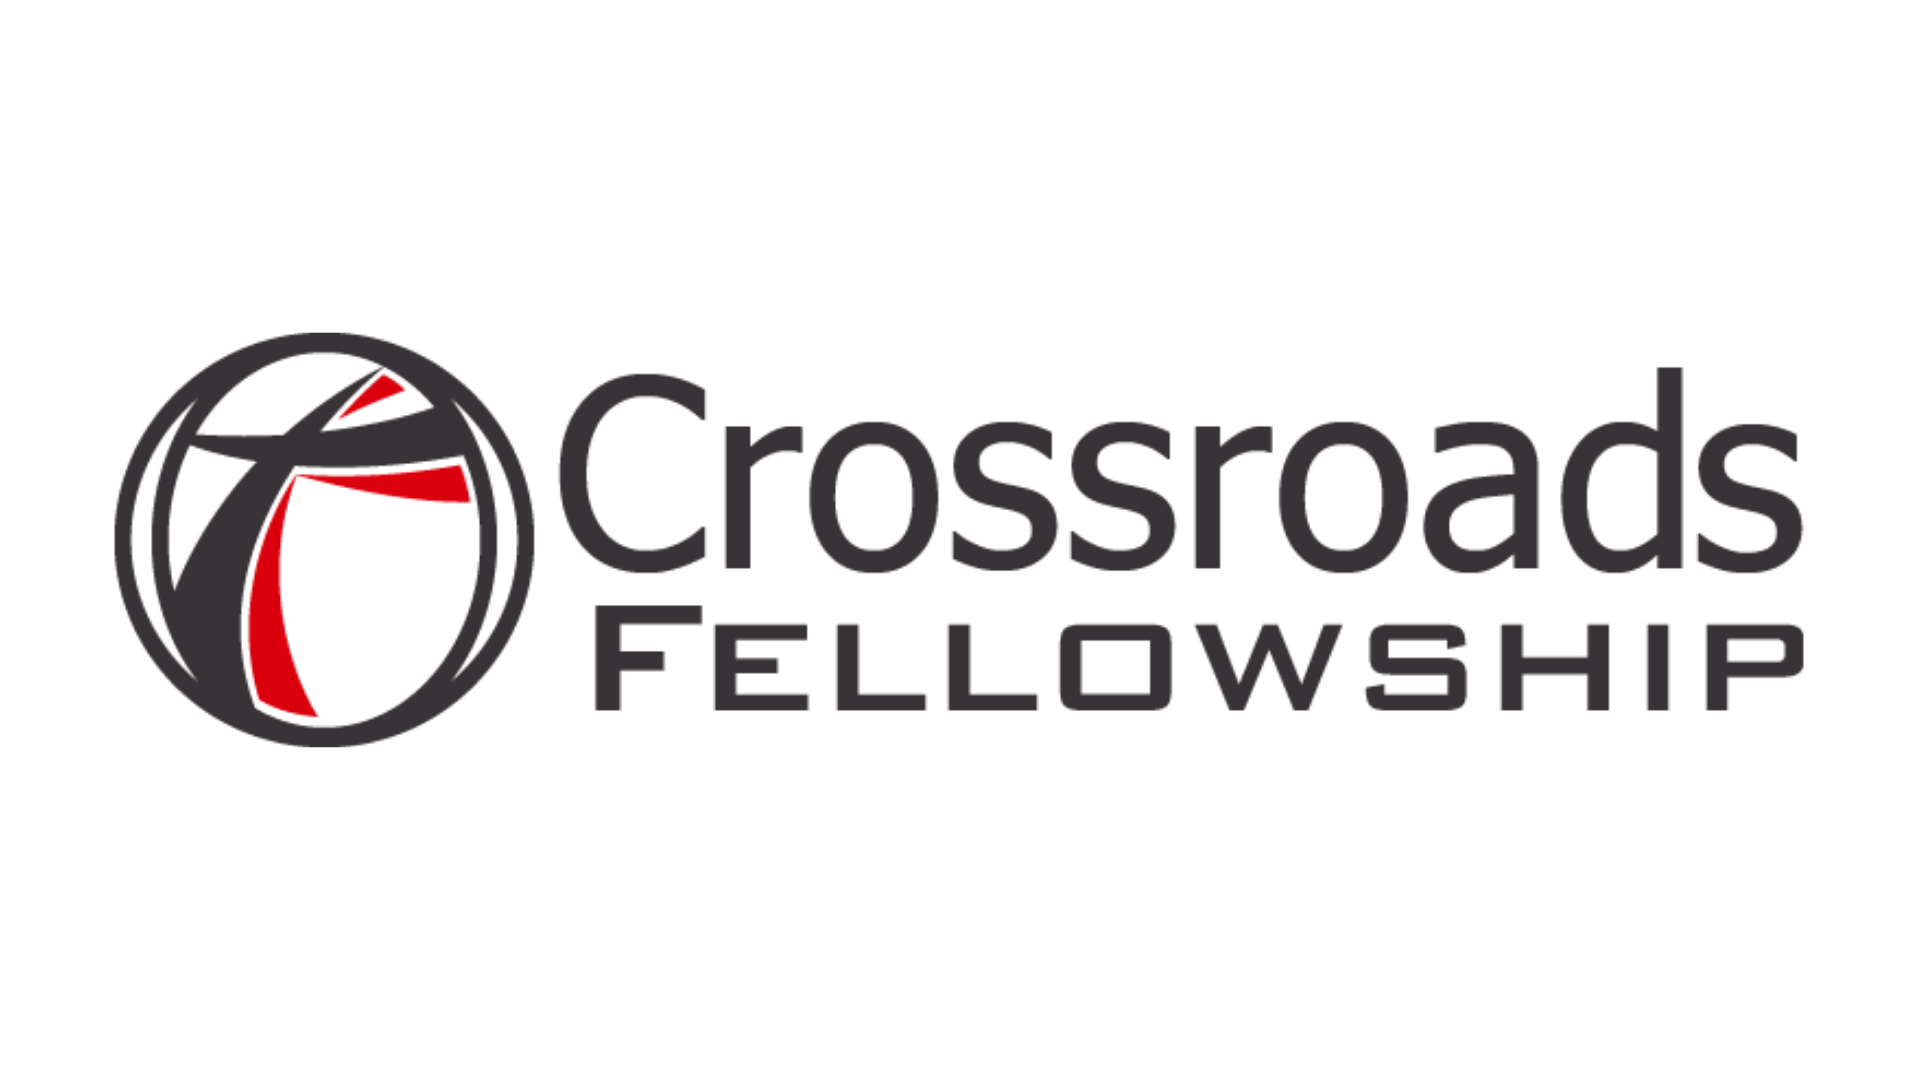 Crossroads Fellowship of The Christian and Missionary Alliance